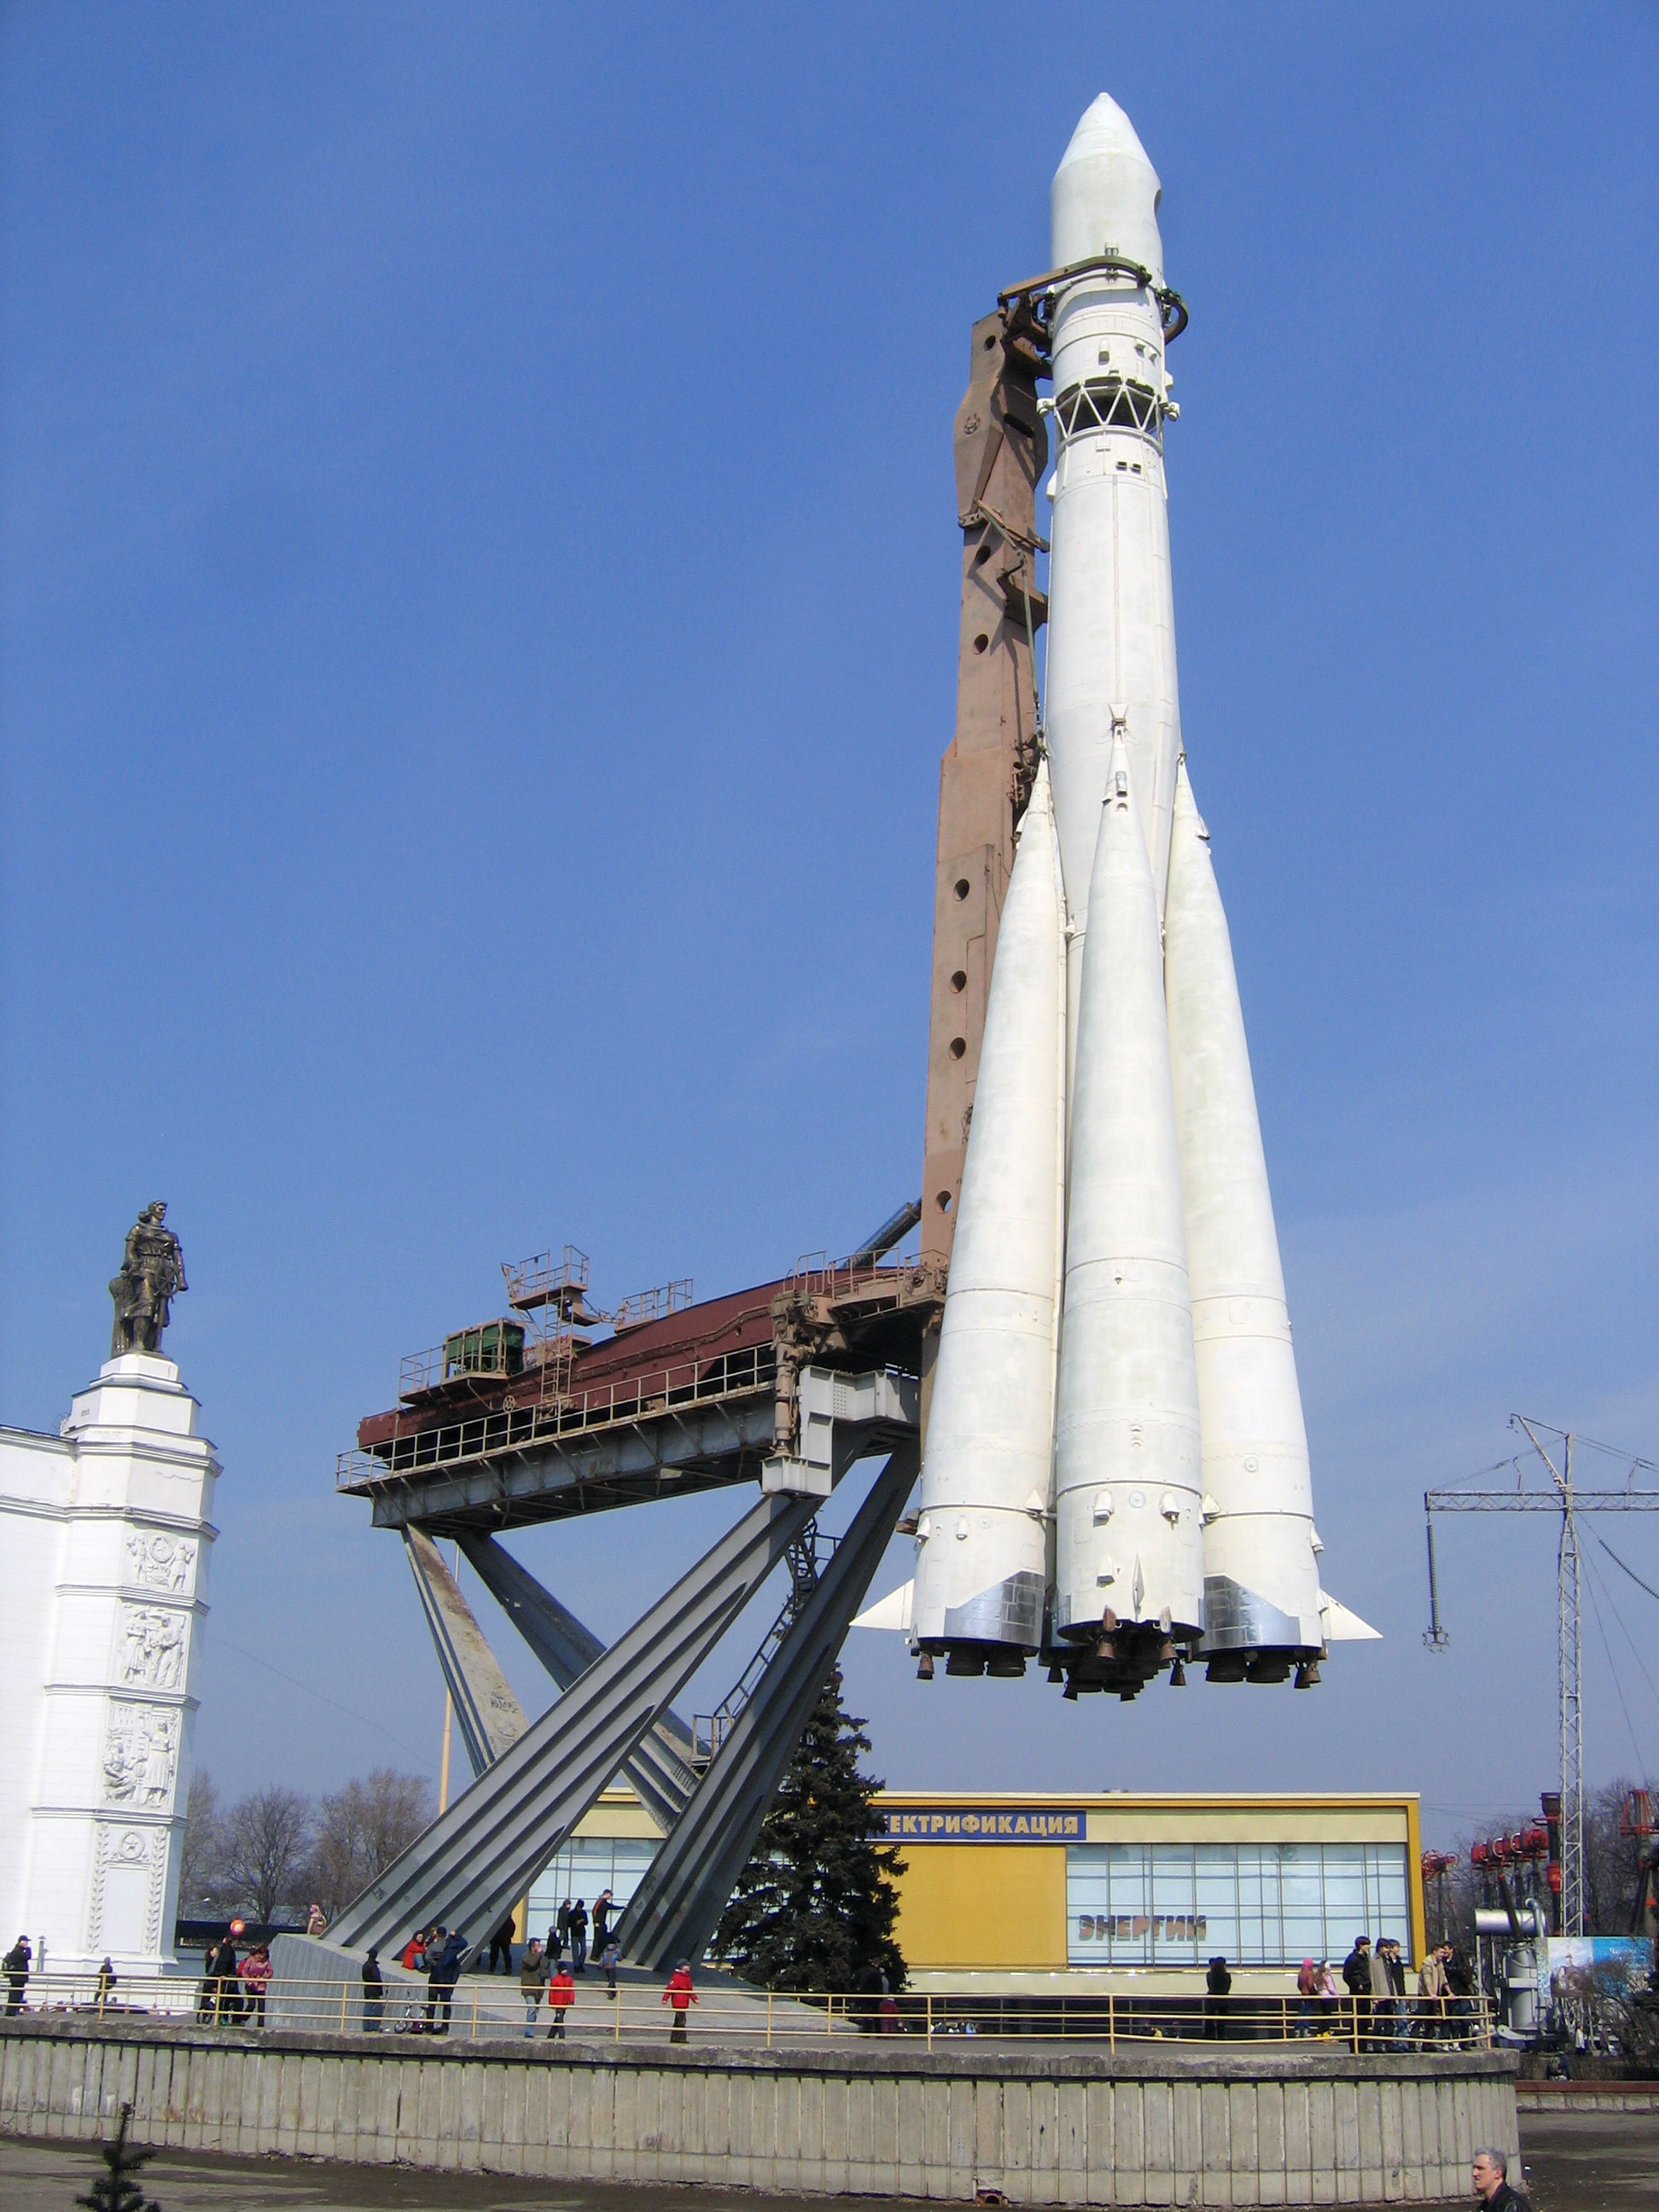 R-7-rocket on display in Moscow